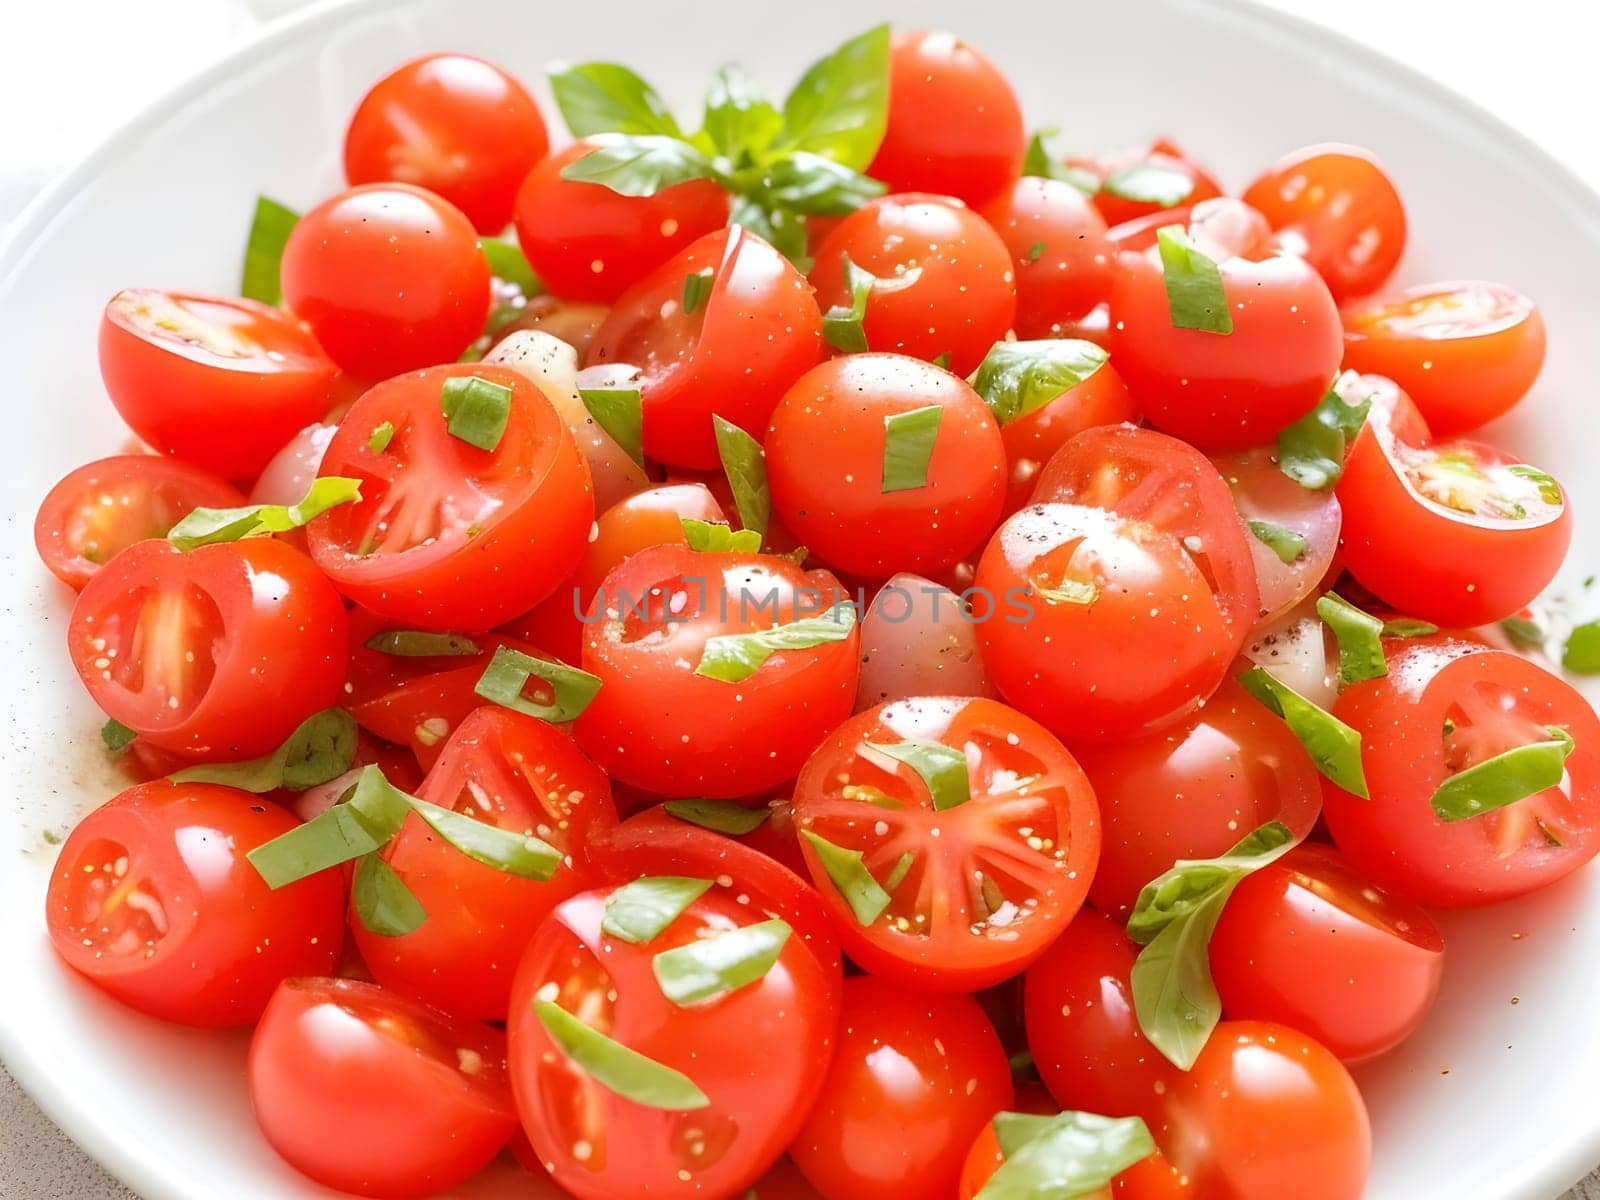 A vibrant tomato salad. A fresh and flavorful salad.